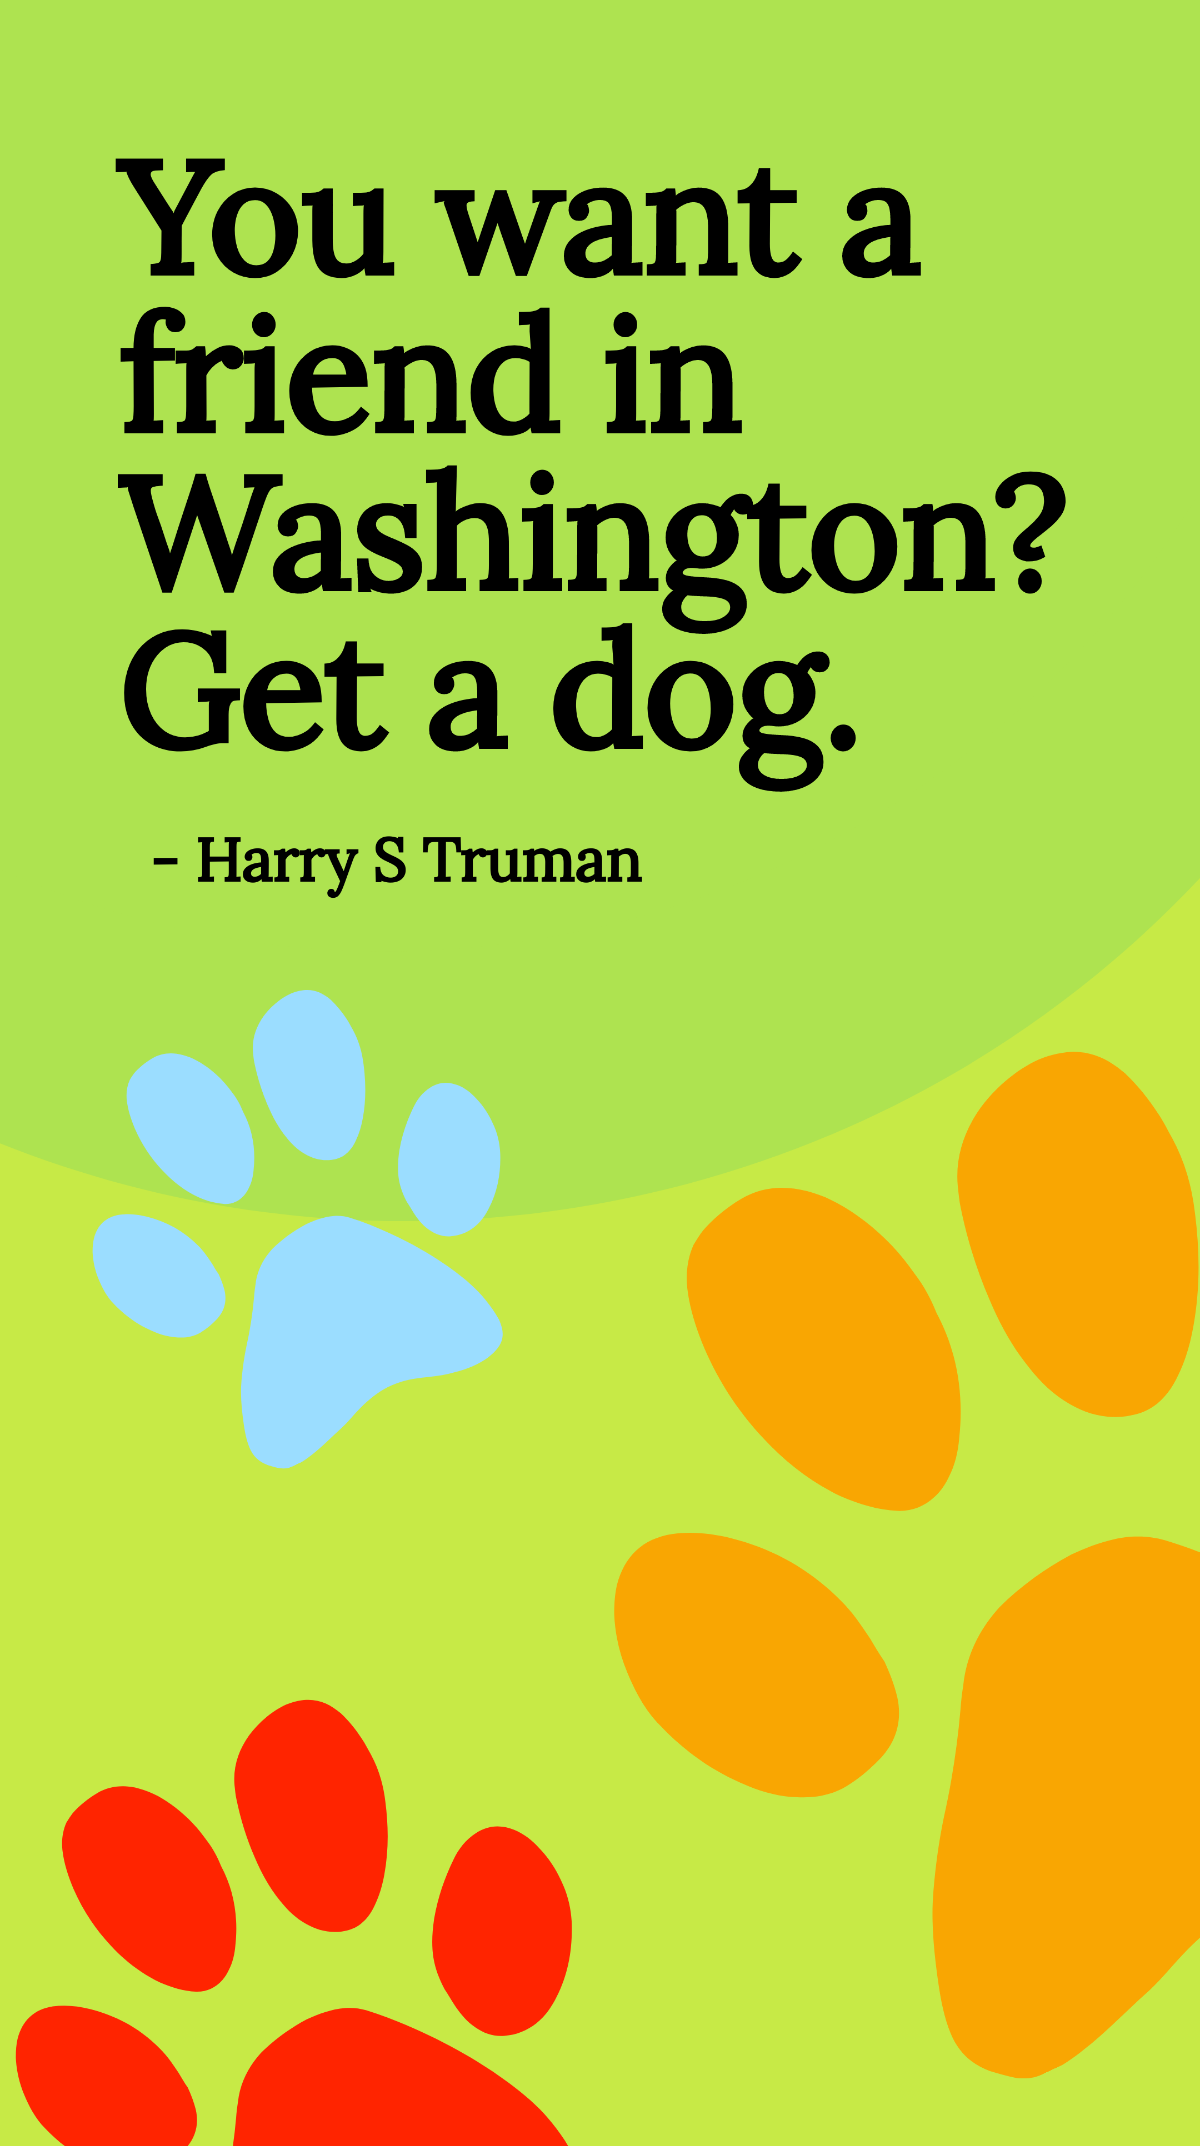 Free Harry S Truman - You want a friend in Washington? Get a dog. Template